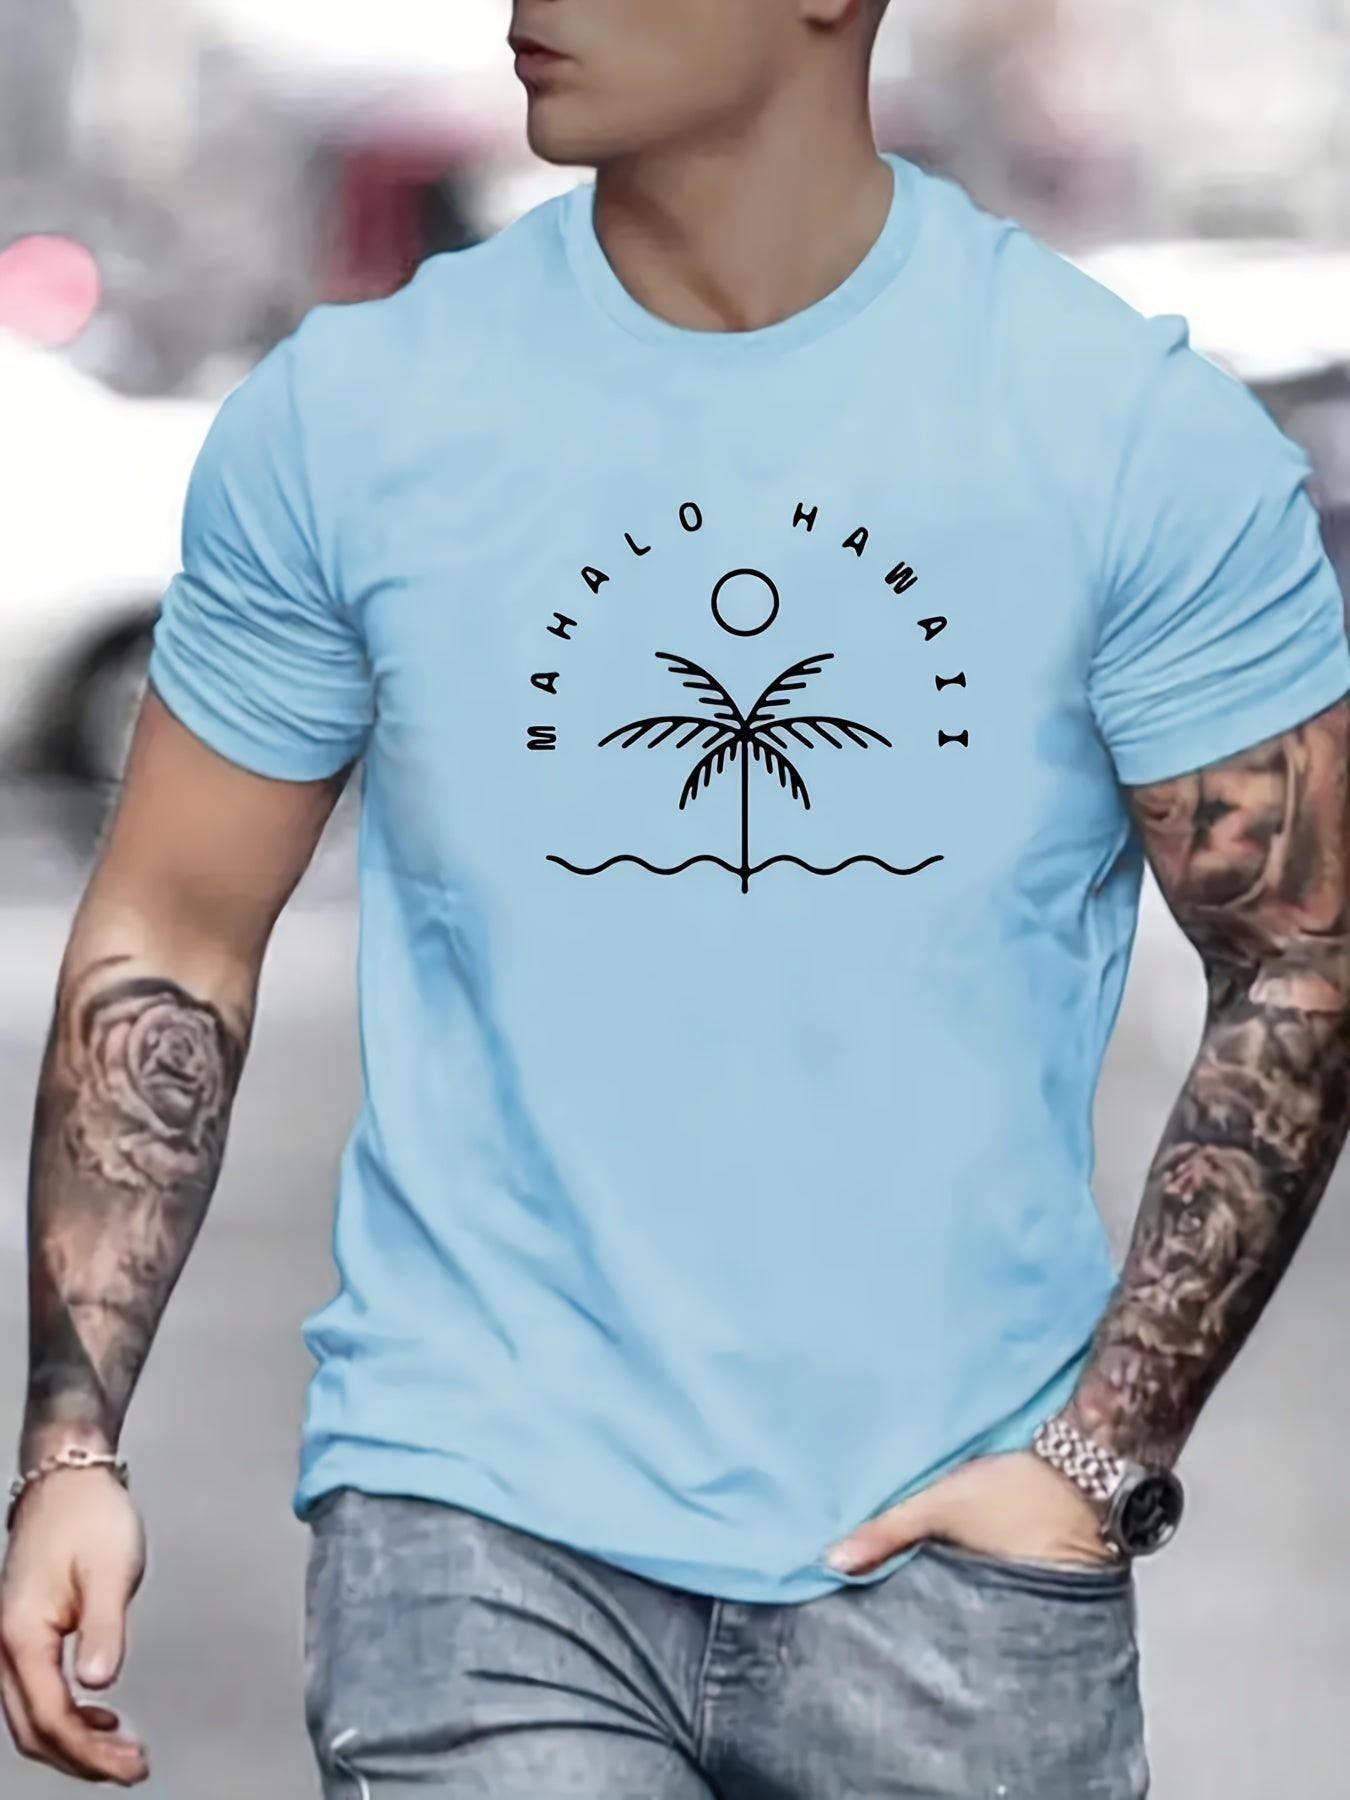 Spade A Print, Men's Graphic T-shirt, Casual Comfy Tees For Summer